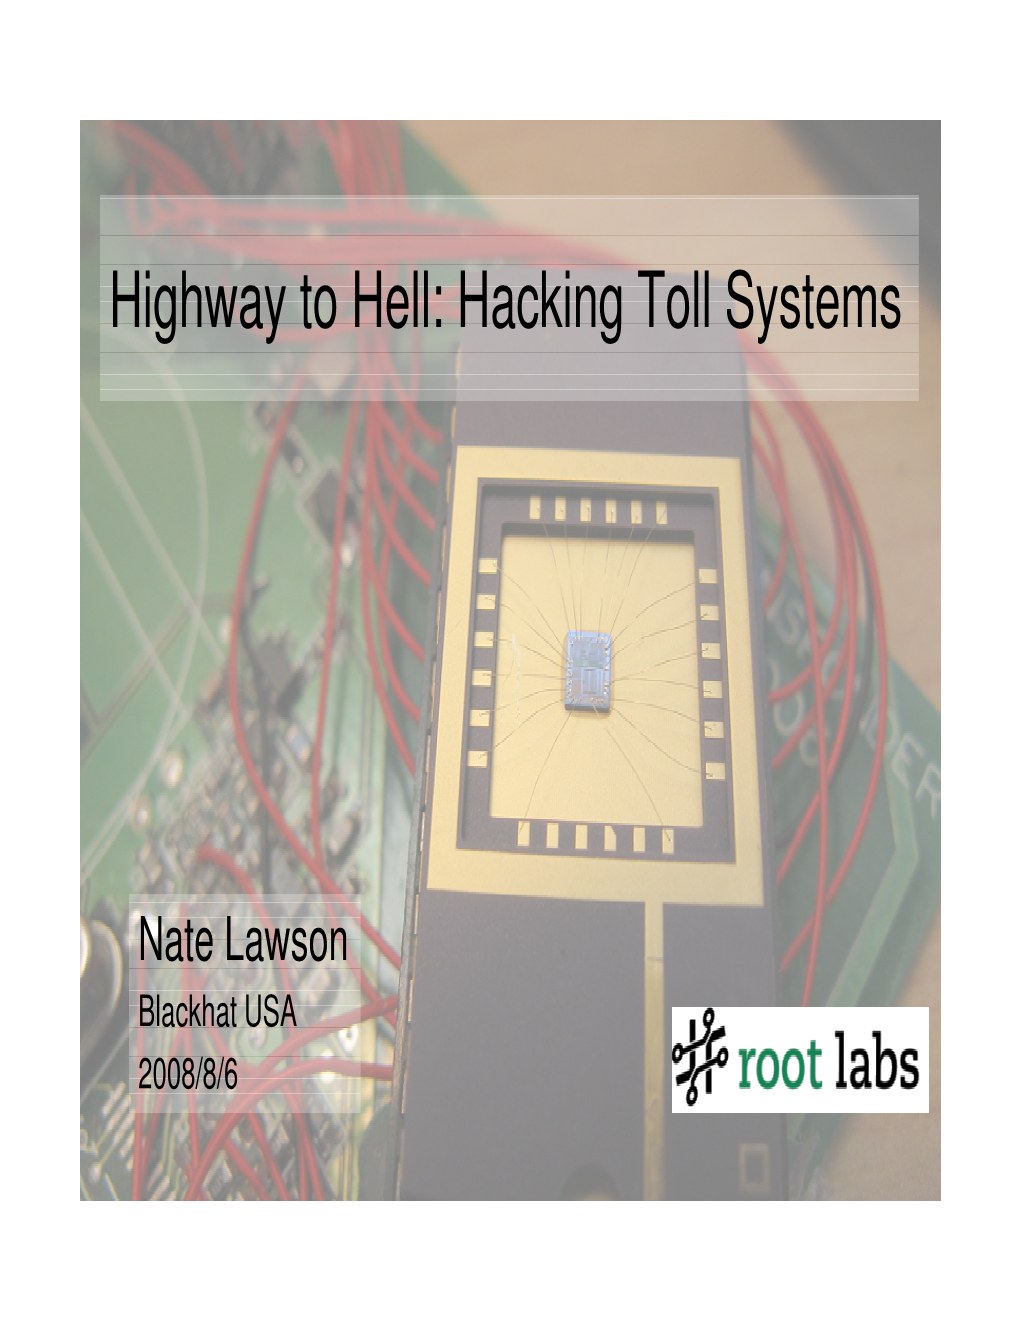 Highway to Hell: Hacking Toll Systems